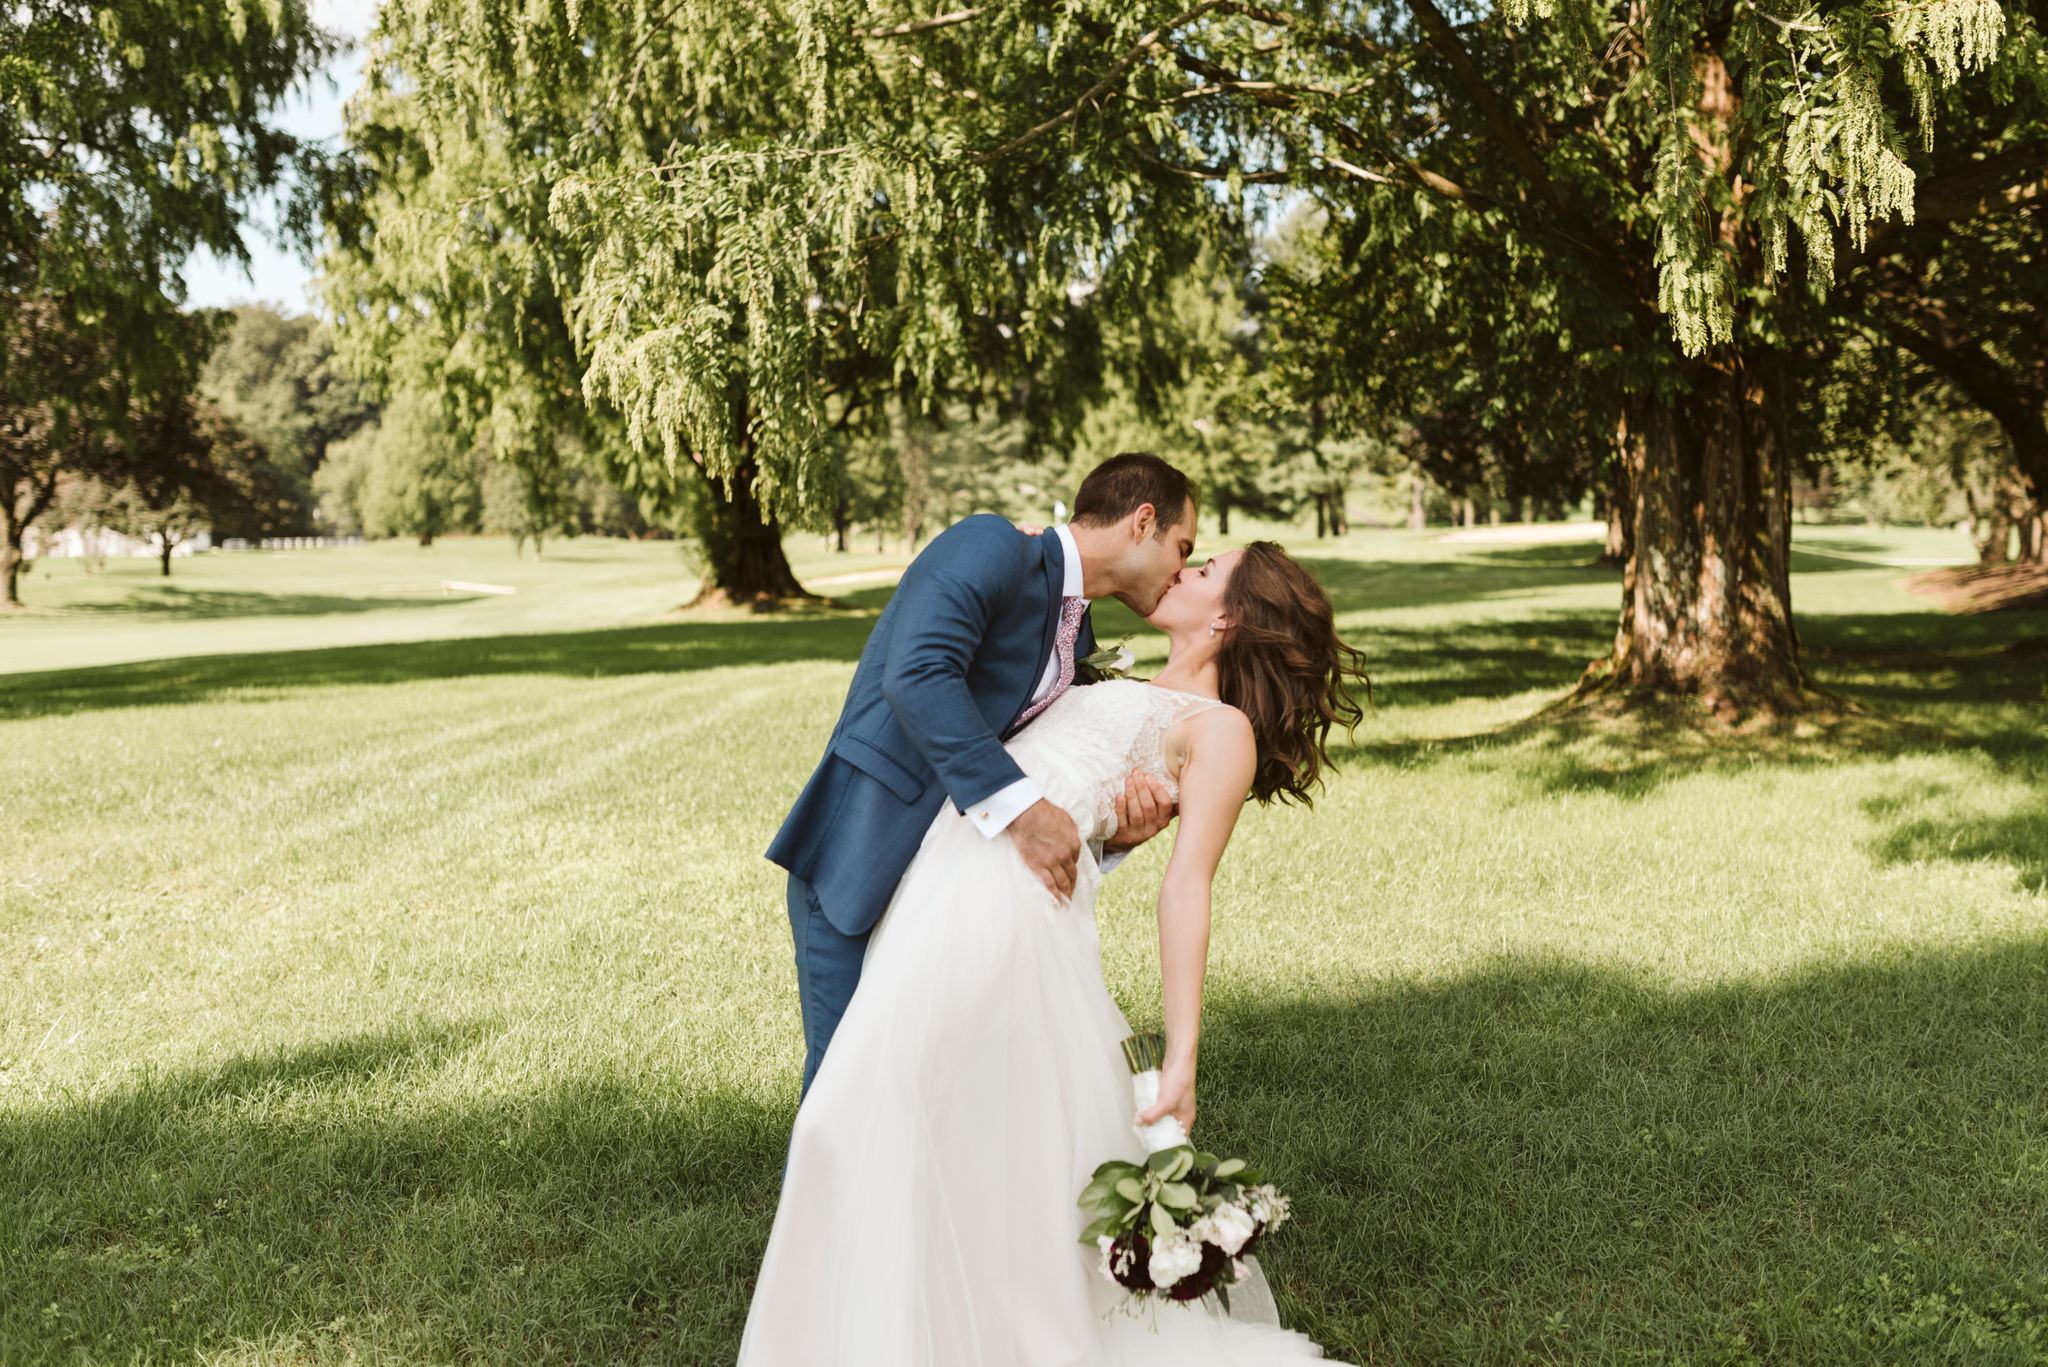  Phoenix Maryland, Baltimore Wedding Photographer, Eagle’s Nest Country Club, Classic, Romantic, Groom Dipping the Bride, Couple Kissing in the Sun, BHLDN Dress 